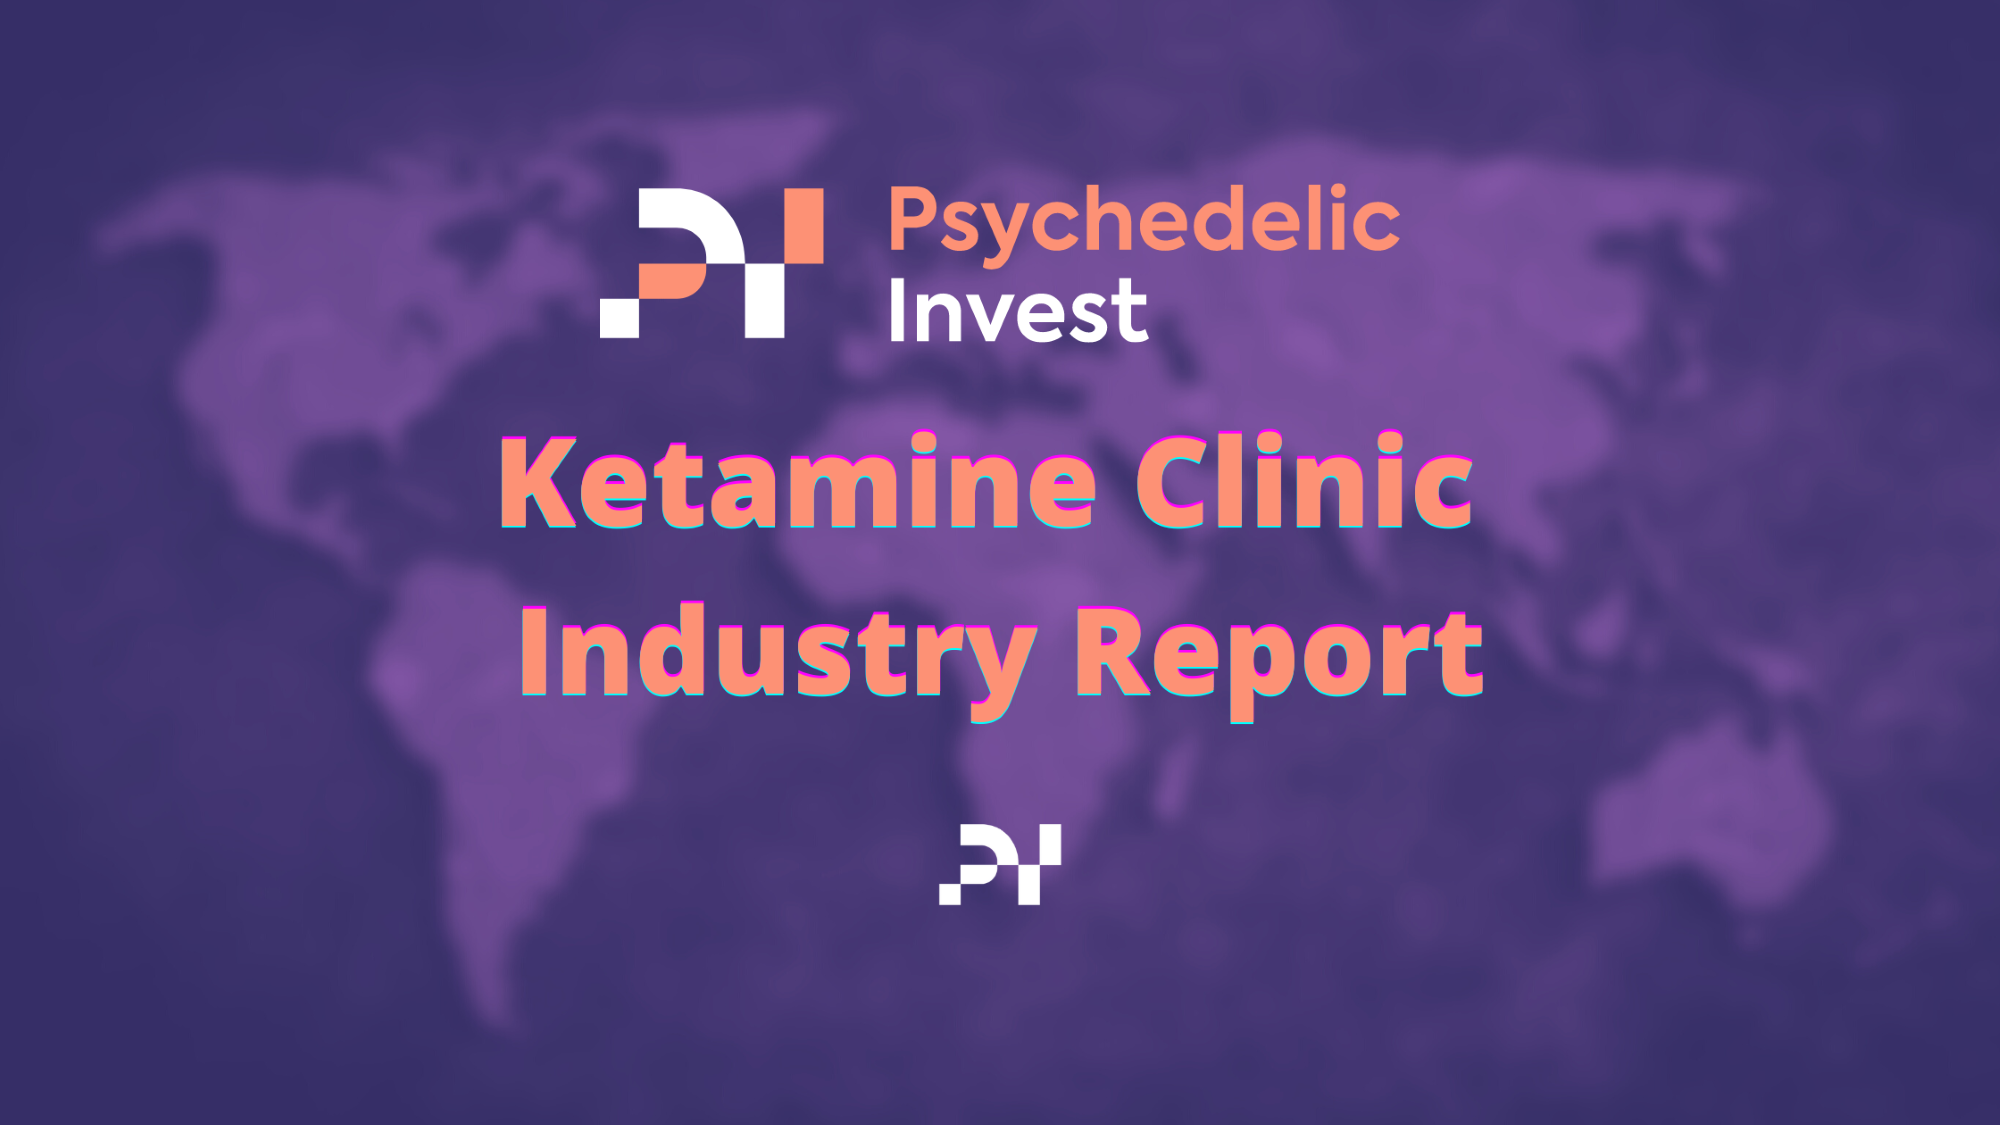 The Exhaustive Ketamine Clinic Industry Report